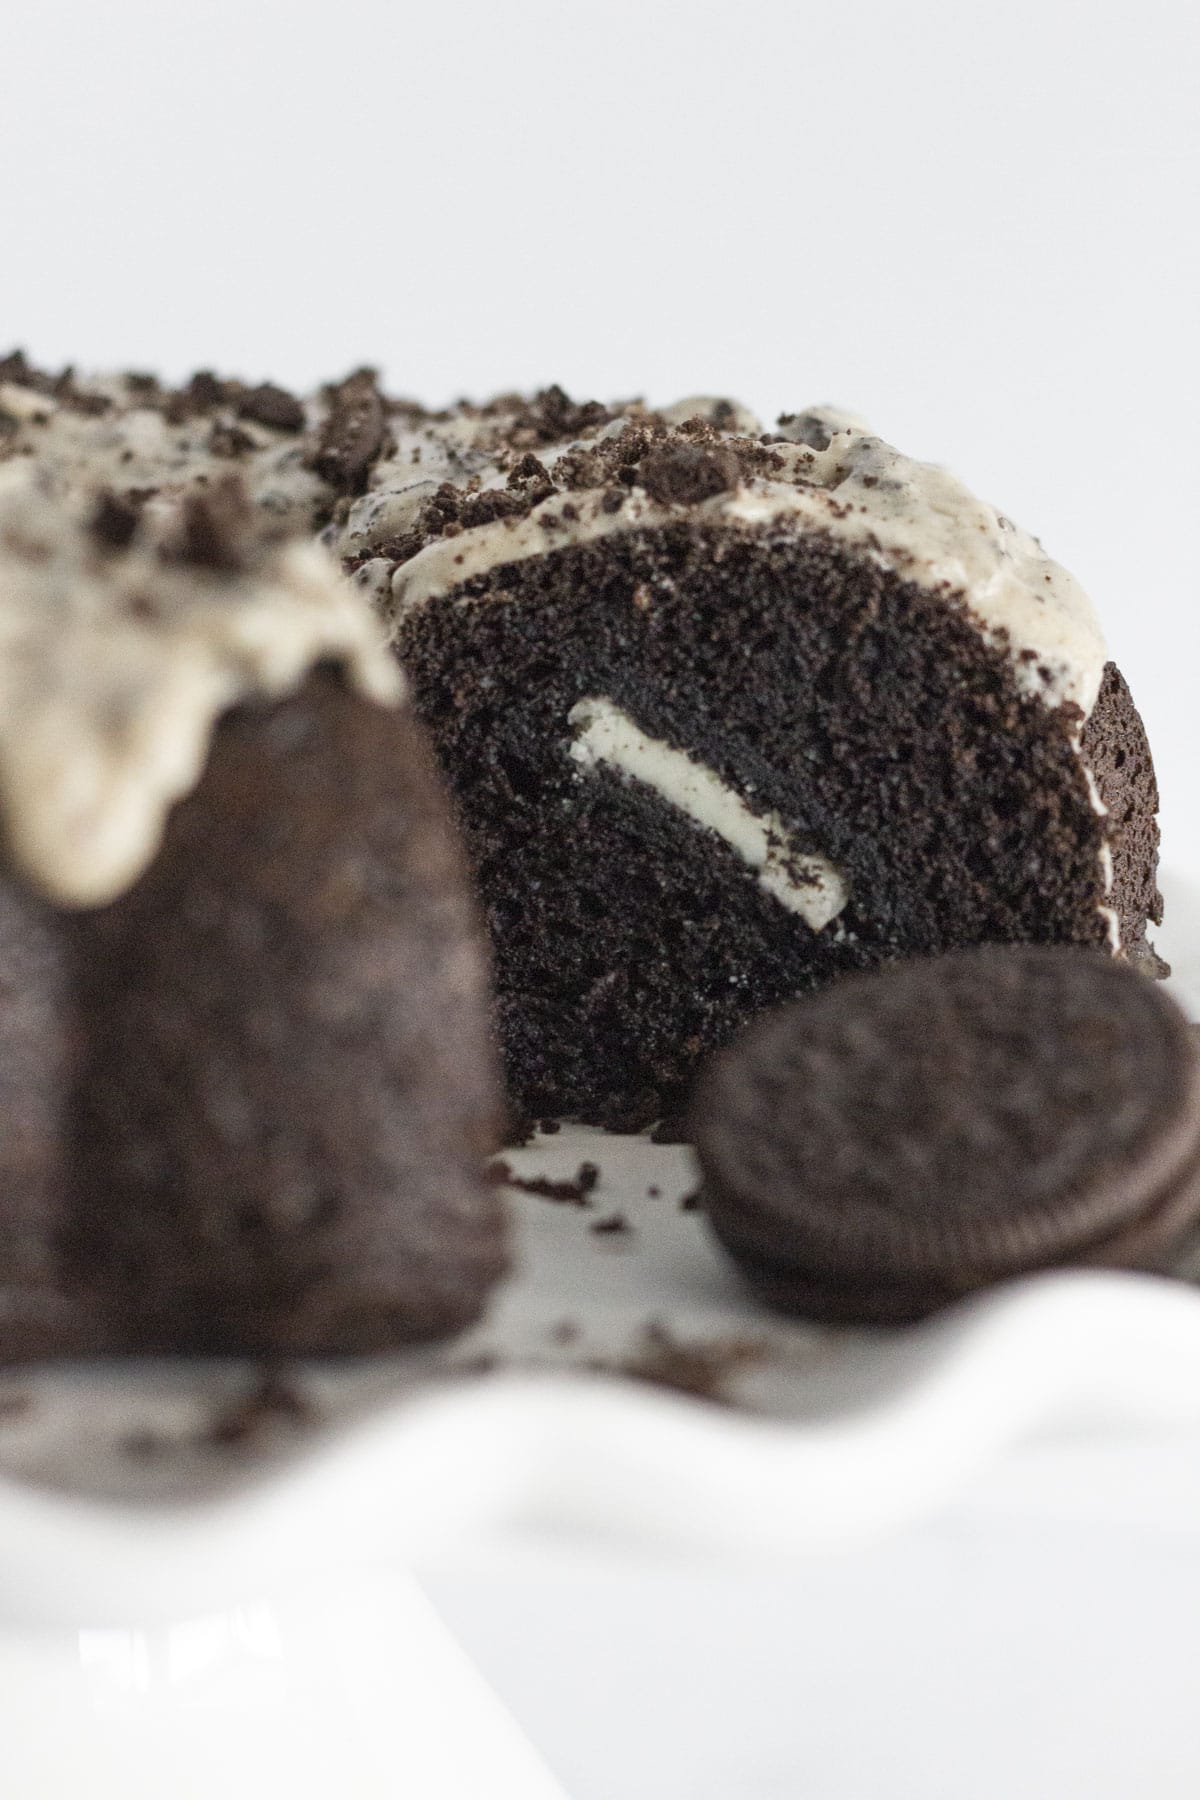 Looking into the inside of an Oreo Bundt Cake.